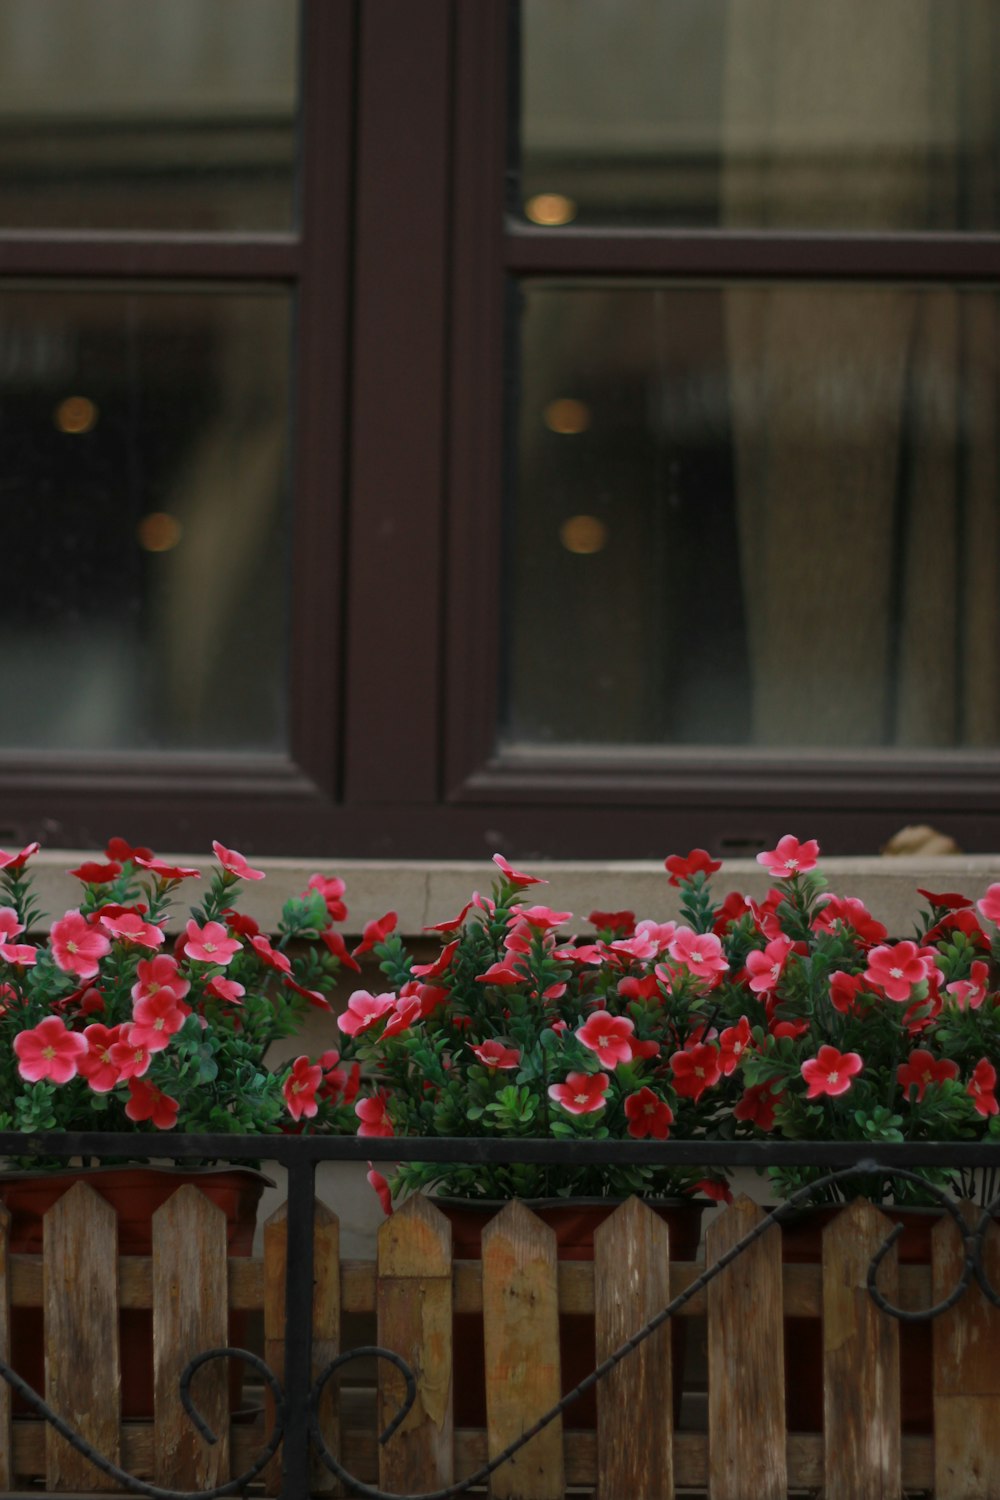 red flowers in a wooden planter outside of a window